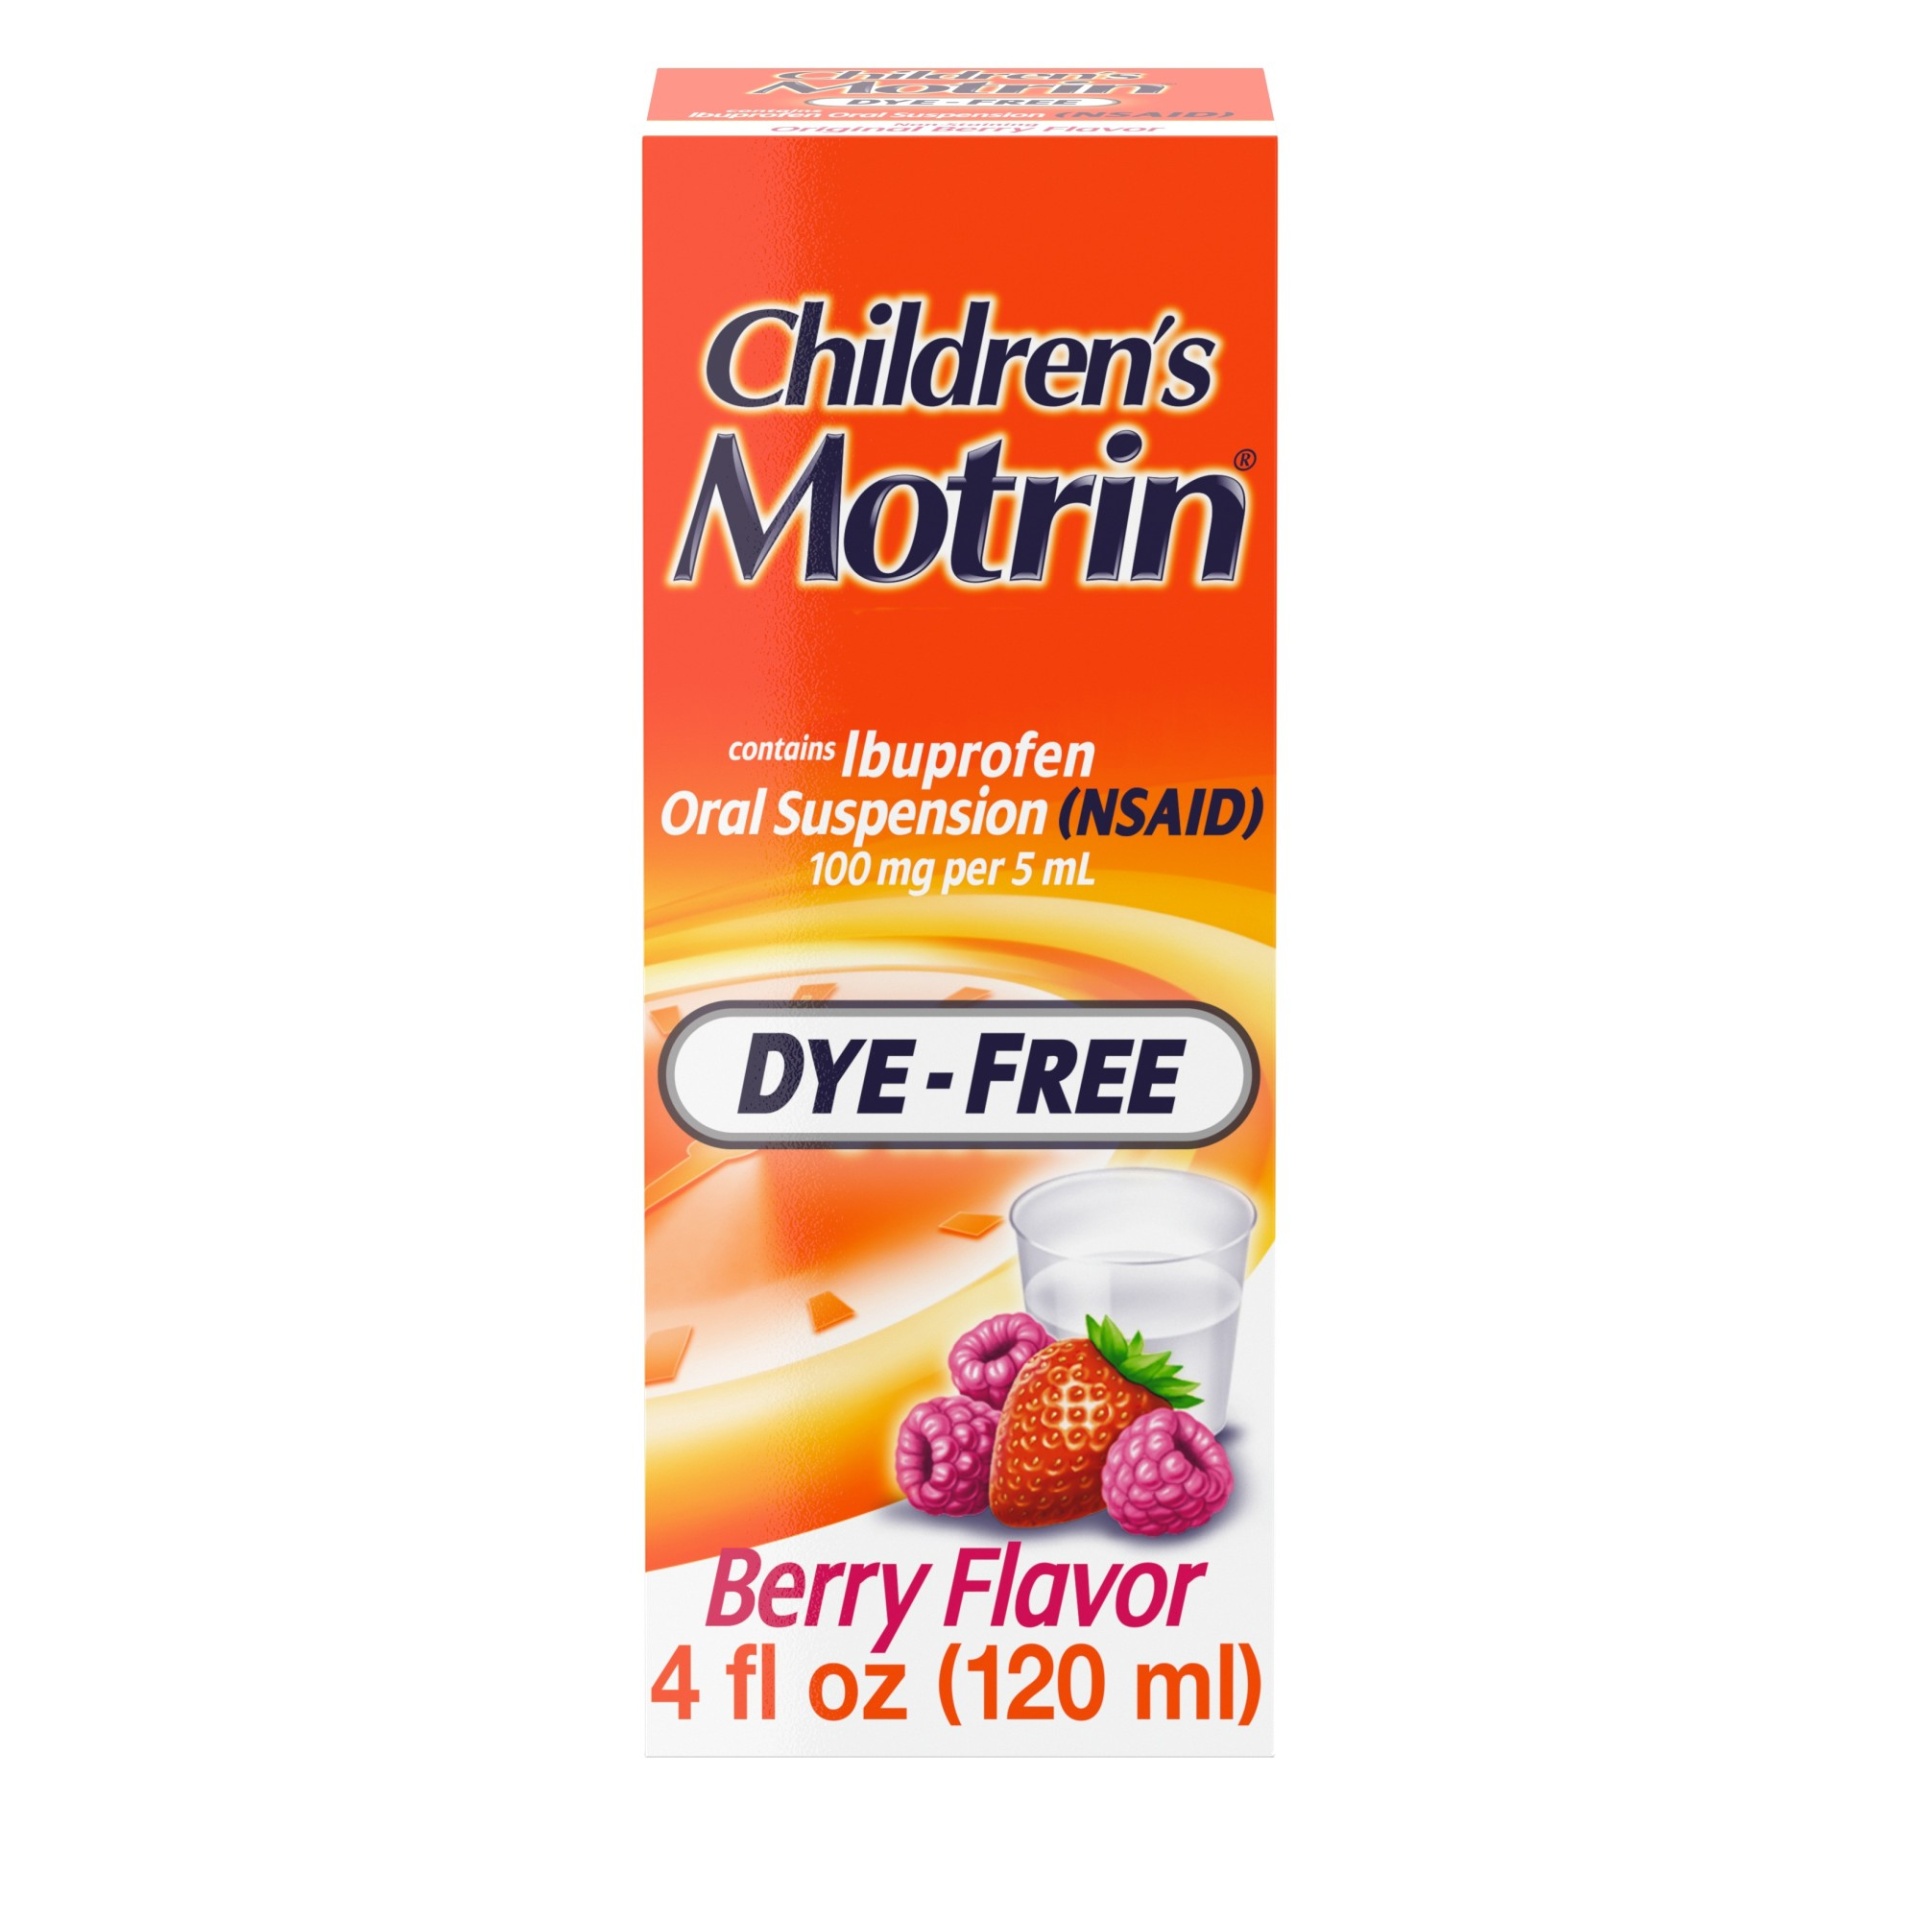 slide 1 of 6, Children's Motrin Oral Suspension 100mg Ibuprofen Medicine, NSAID Fever Reducer & Pain Reliever for Minor Aches & Pains Due to Cold & Flu, Dye Free, Alcohol-Free, Berry Flavored, 4 fl oz